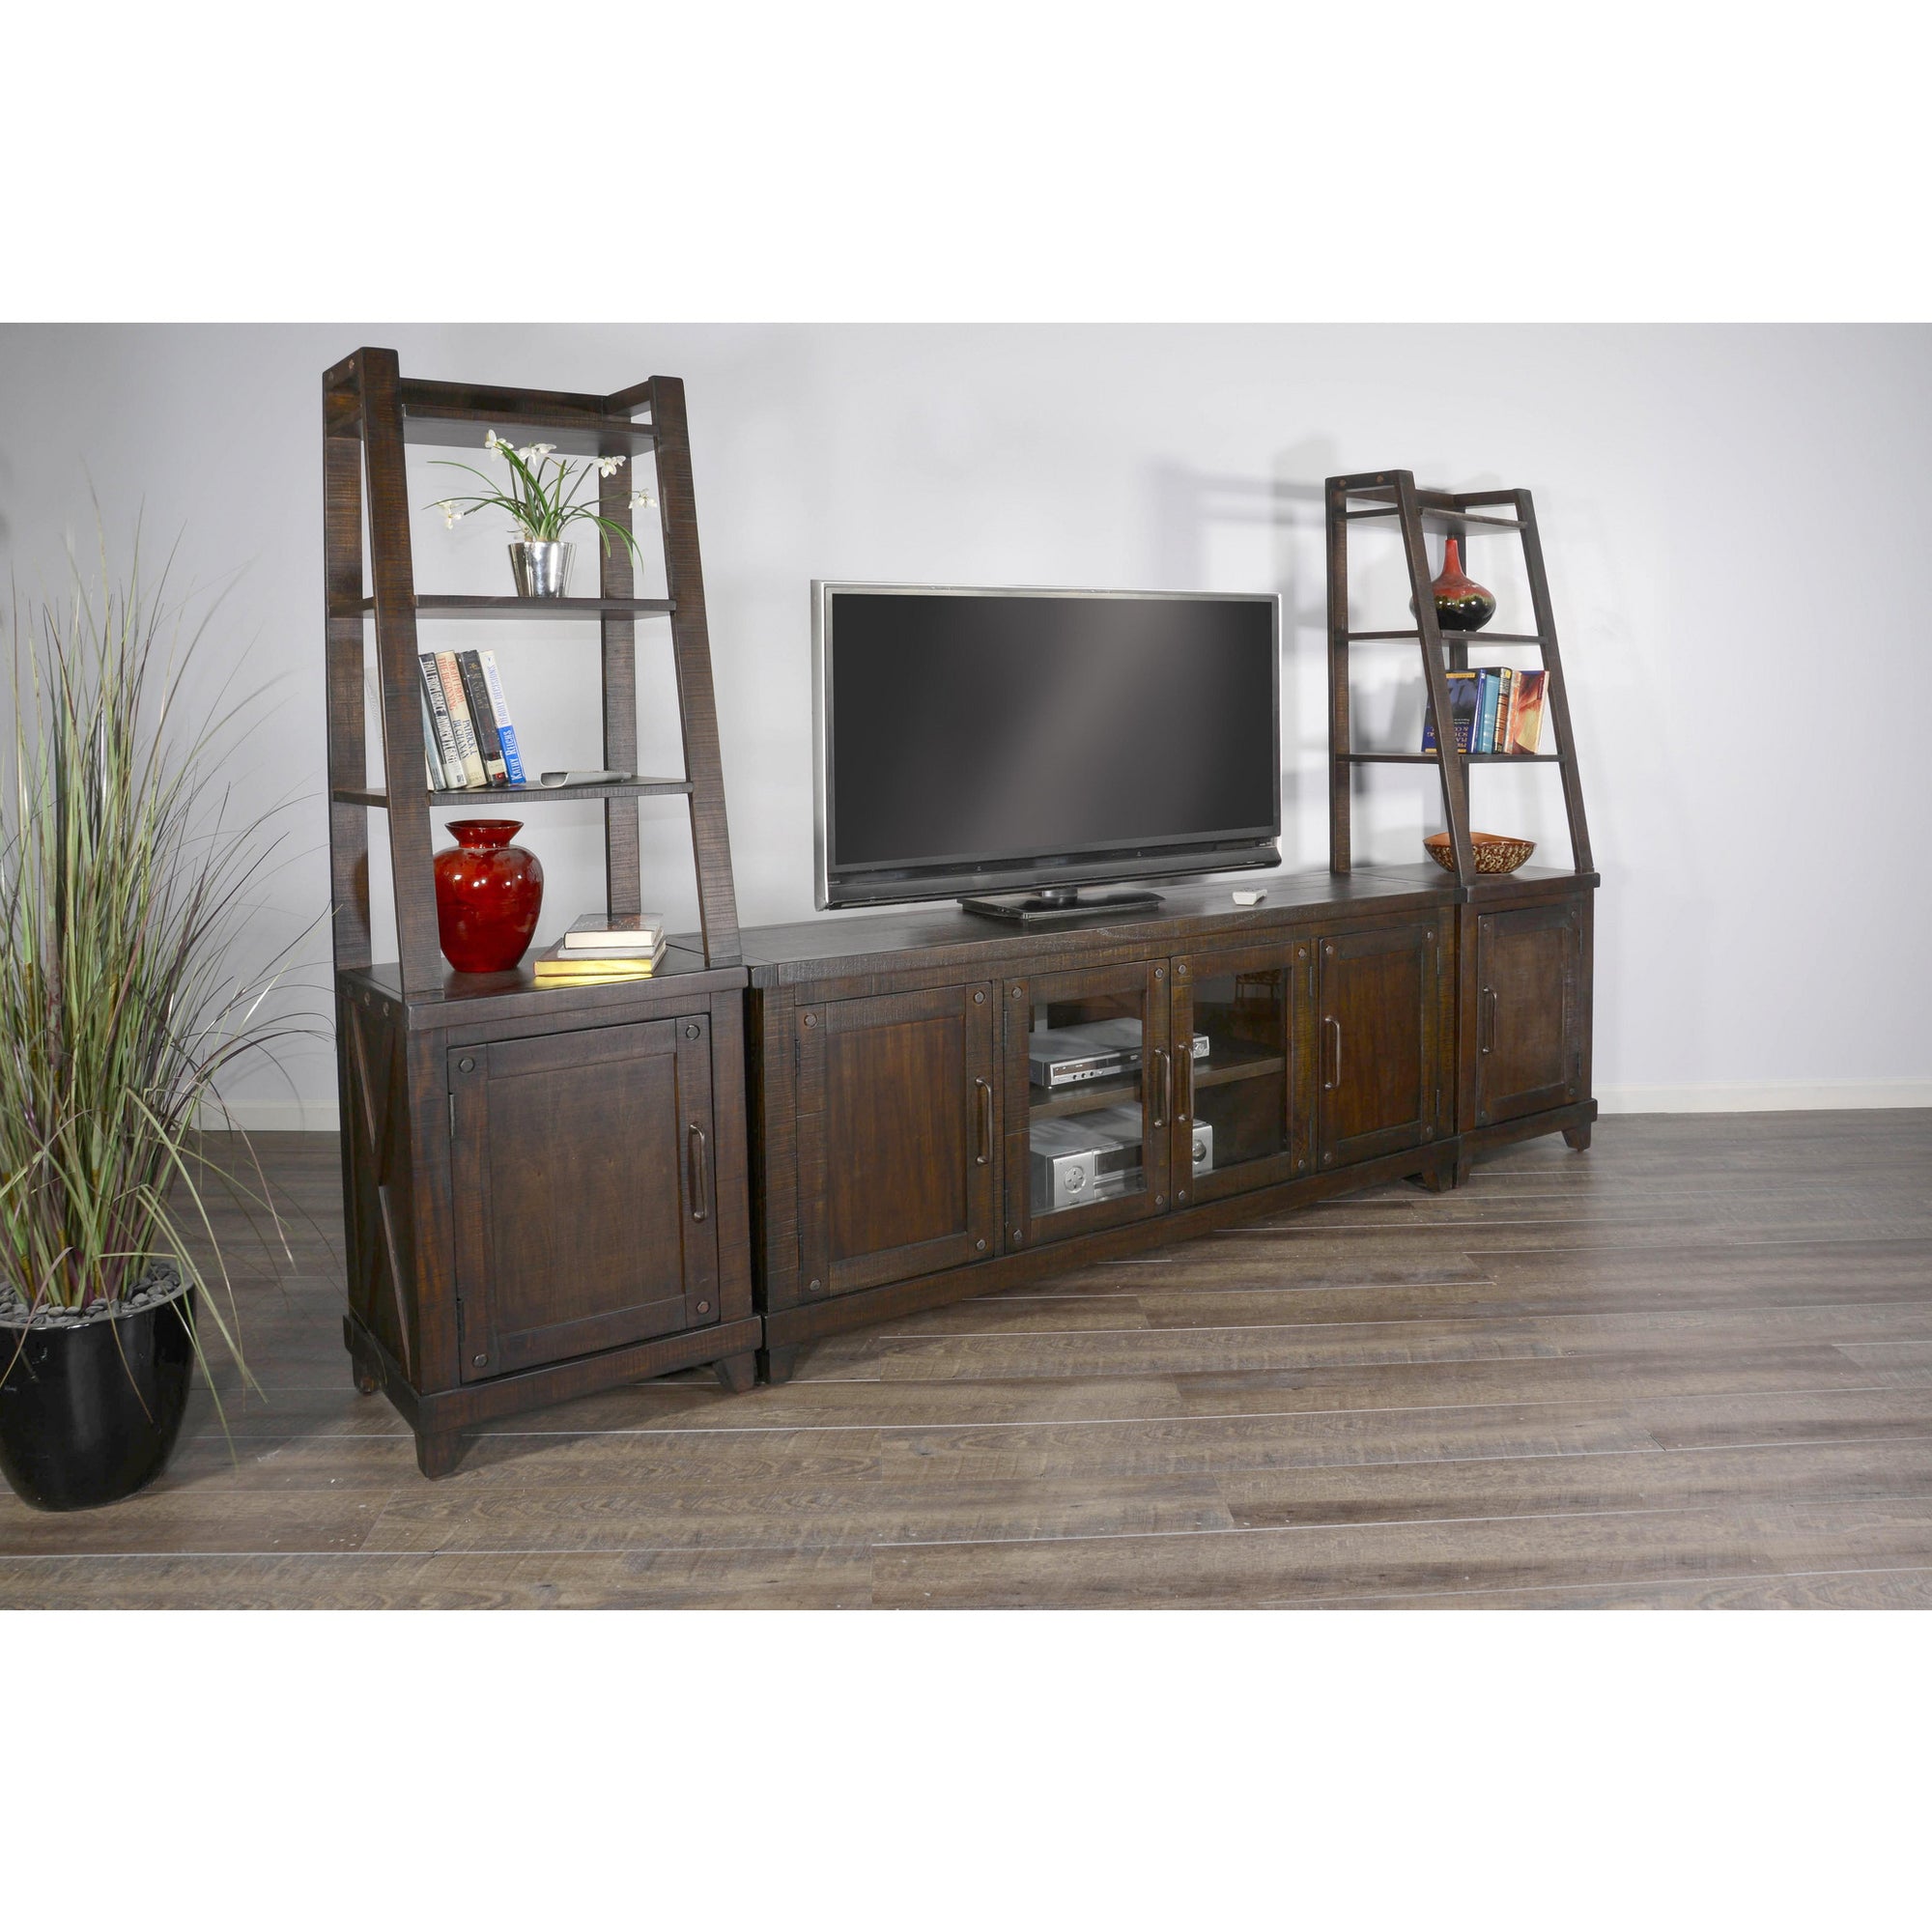 Vivian 64 inch Media Console with Piers